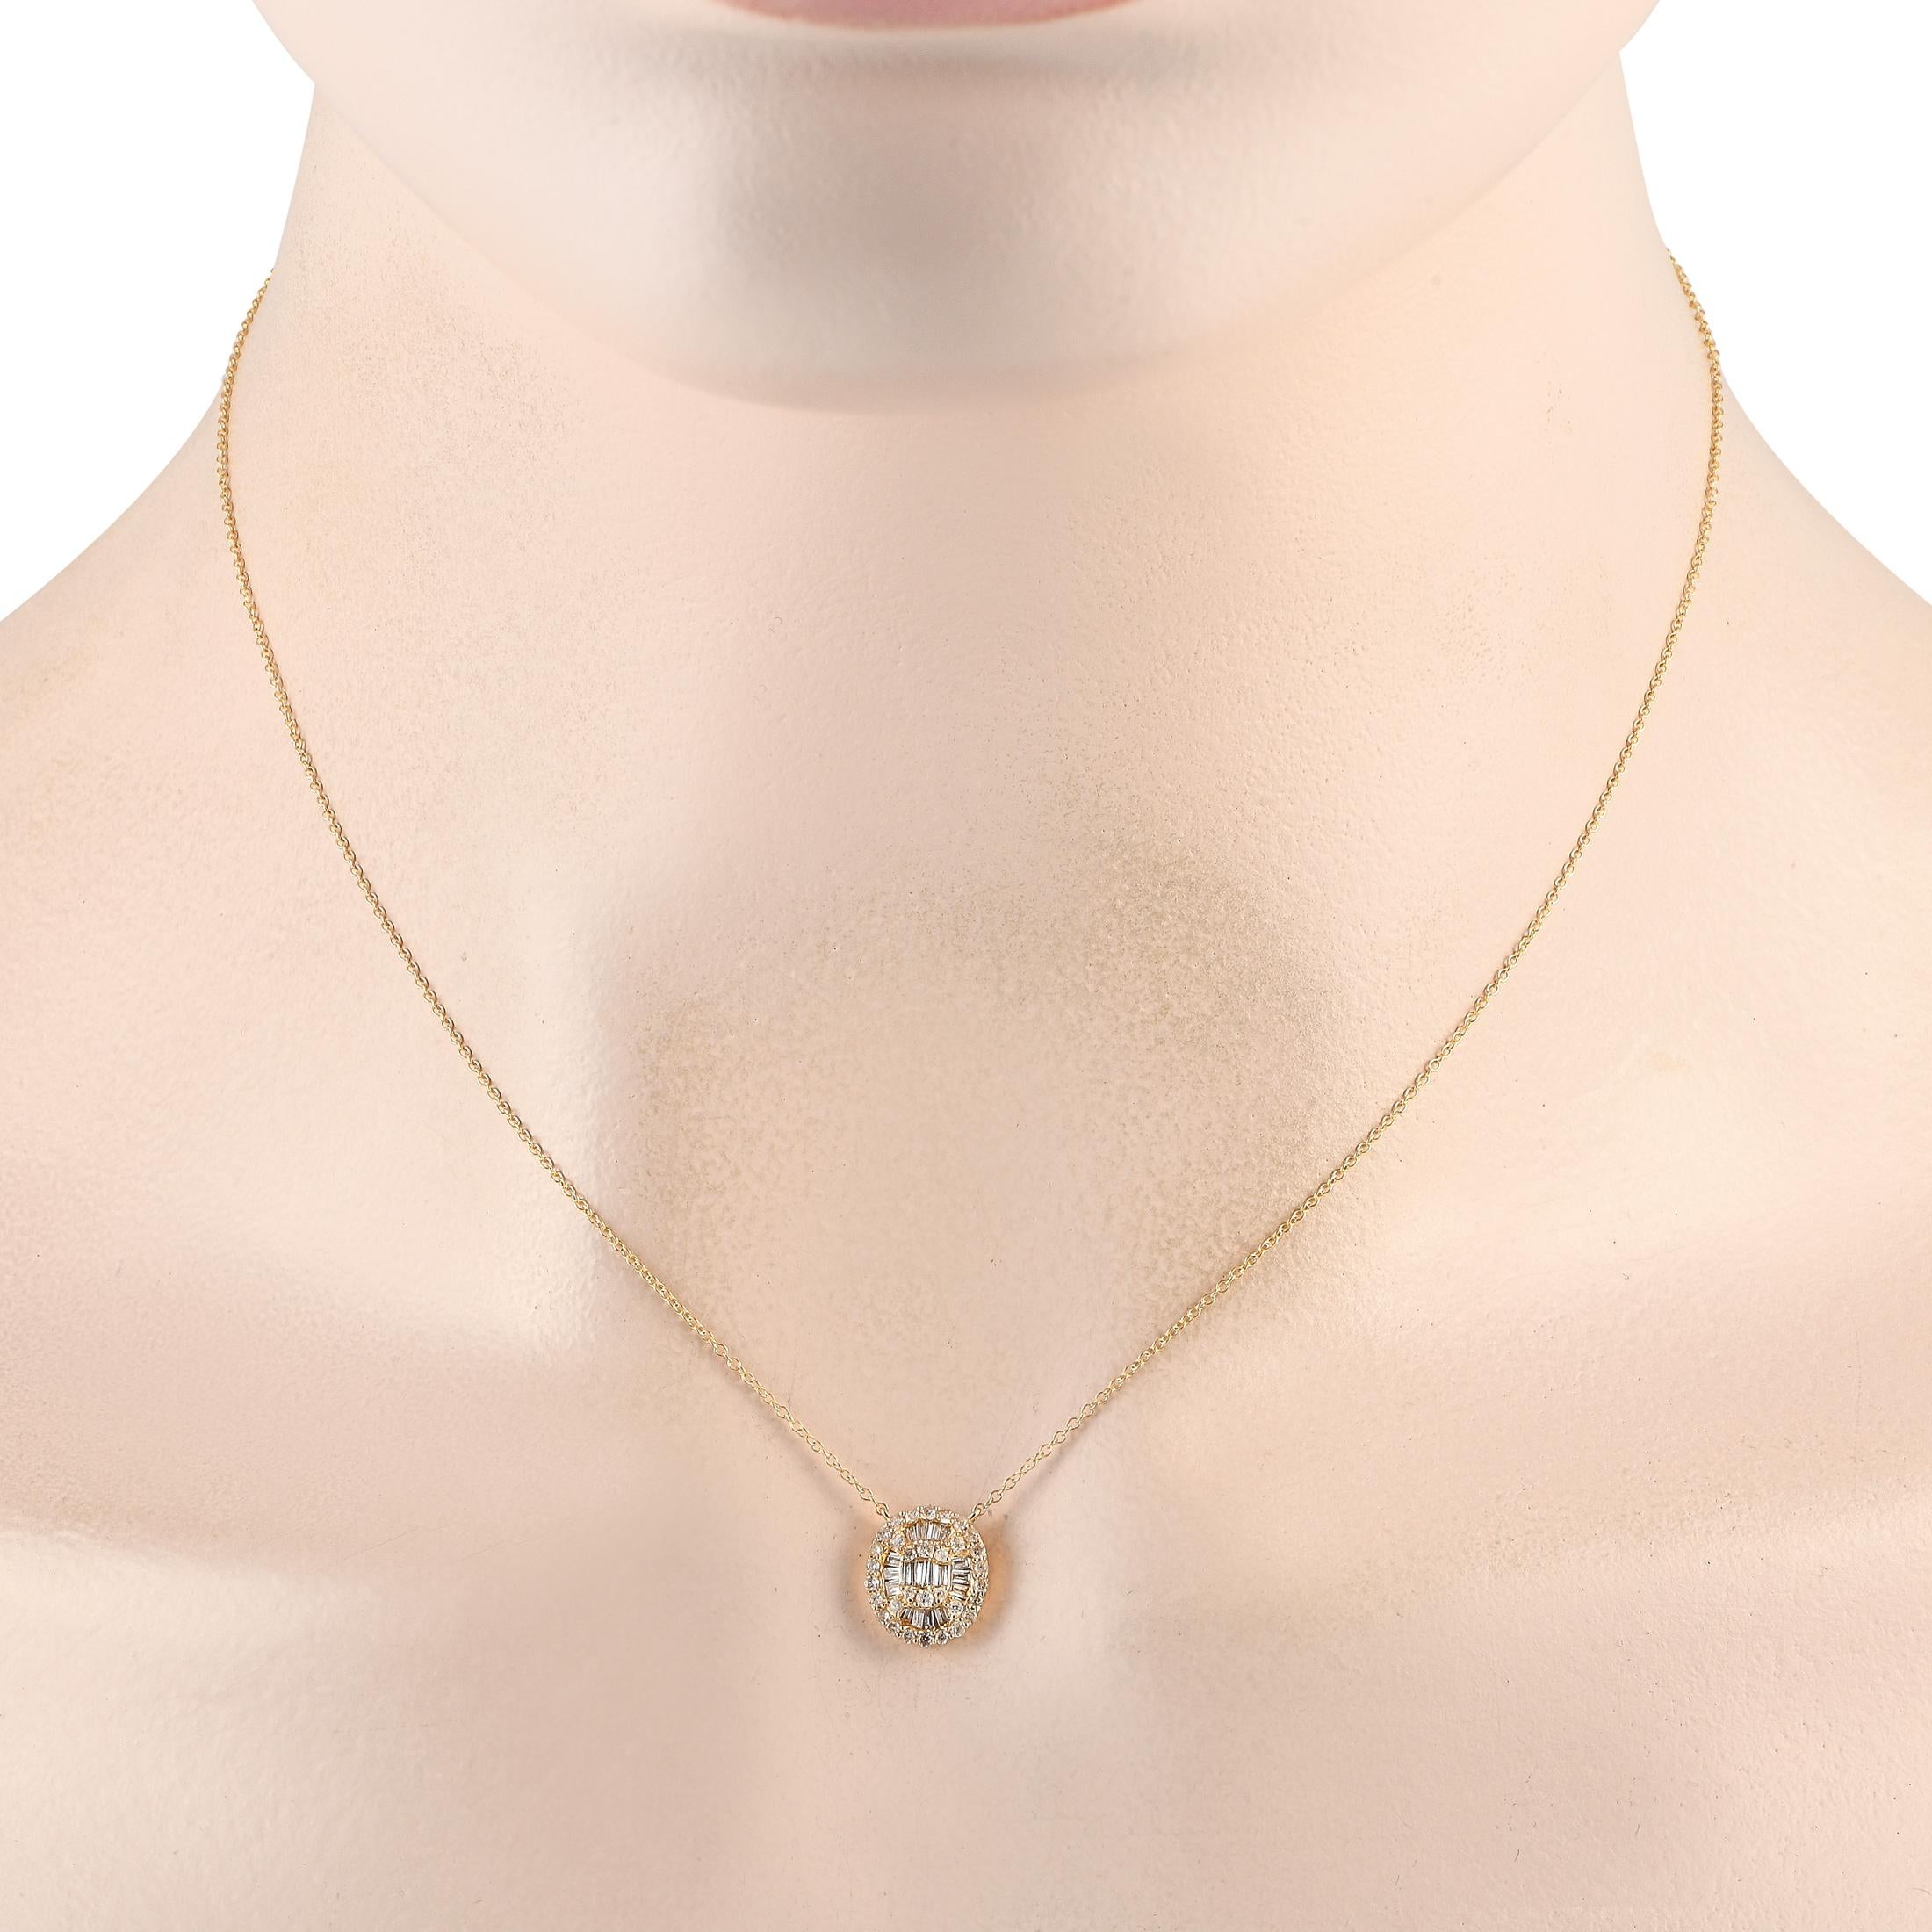 LB Exclusive 14K Yellow Gold 0.31ct Diamond Cluster Necklace PN14719 In New Condition For Sale In Southampton, PA